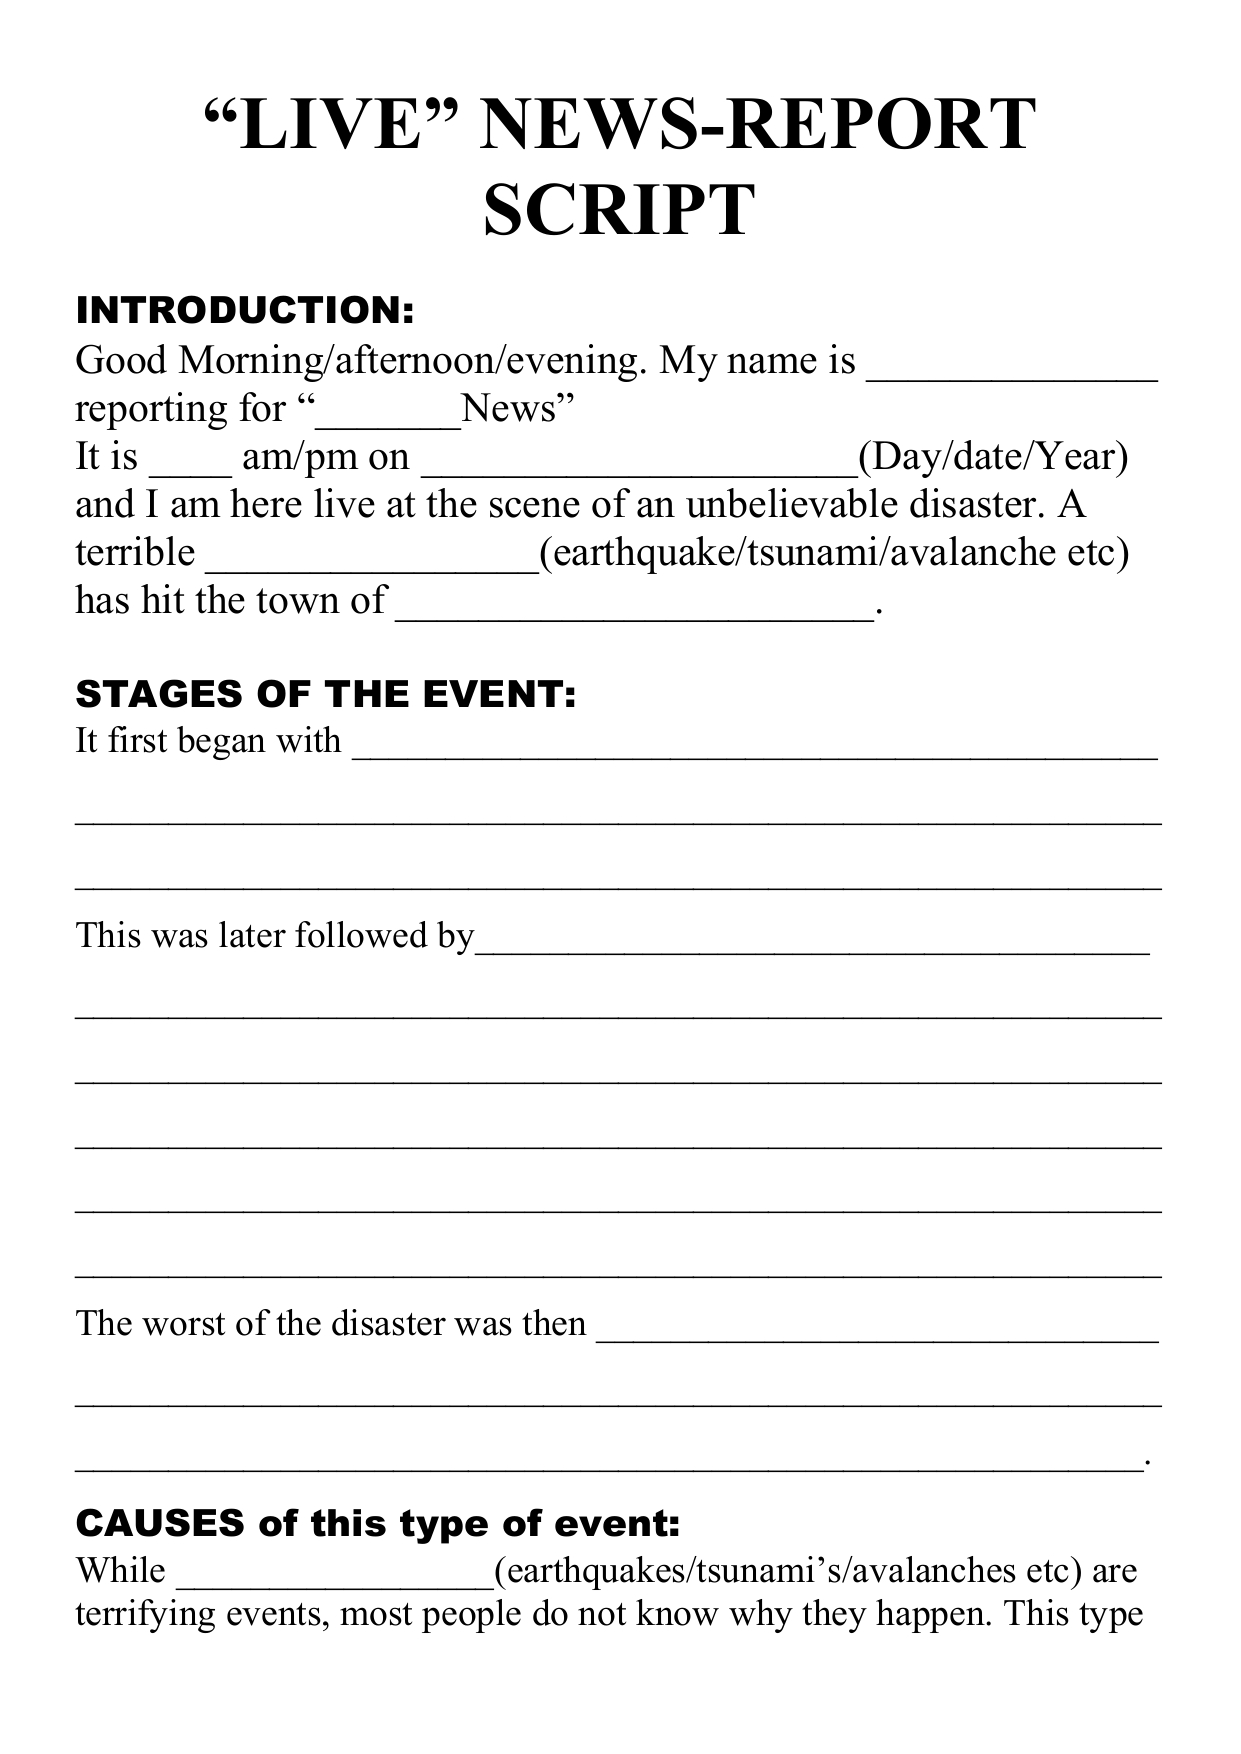 Natural Disaster - Live Newsreport Script Template With Regard To News Report Template